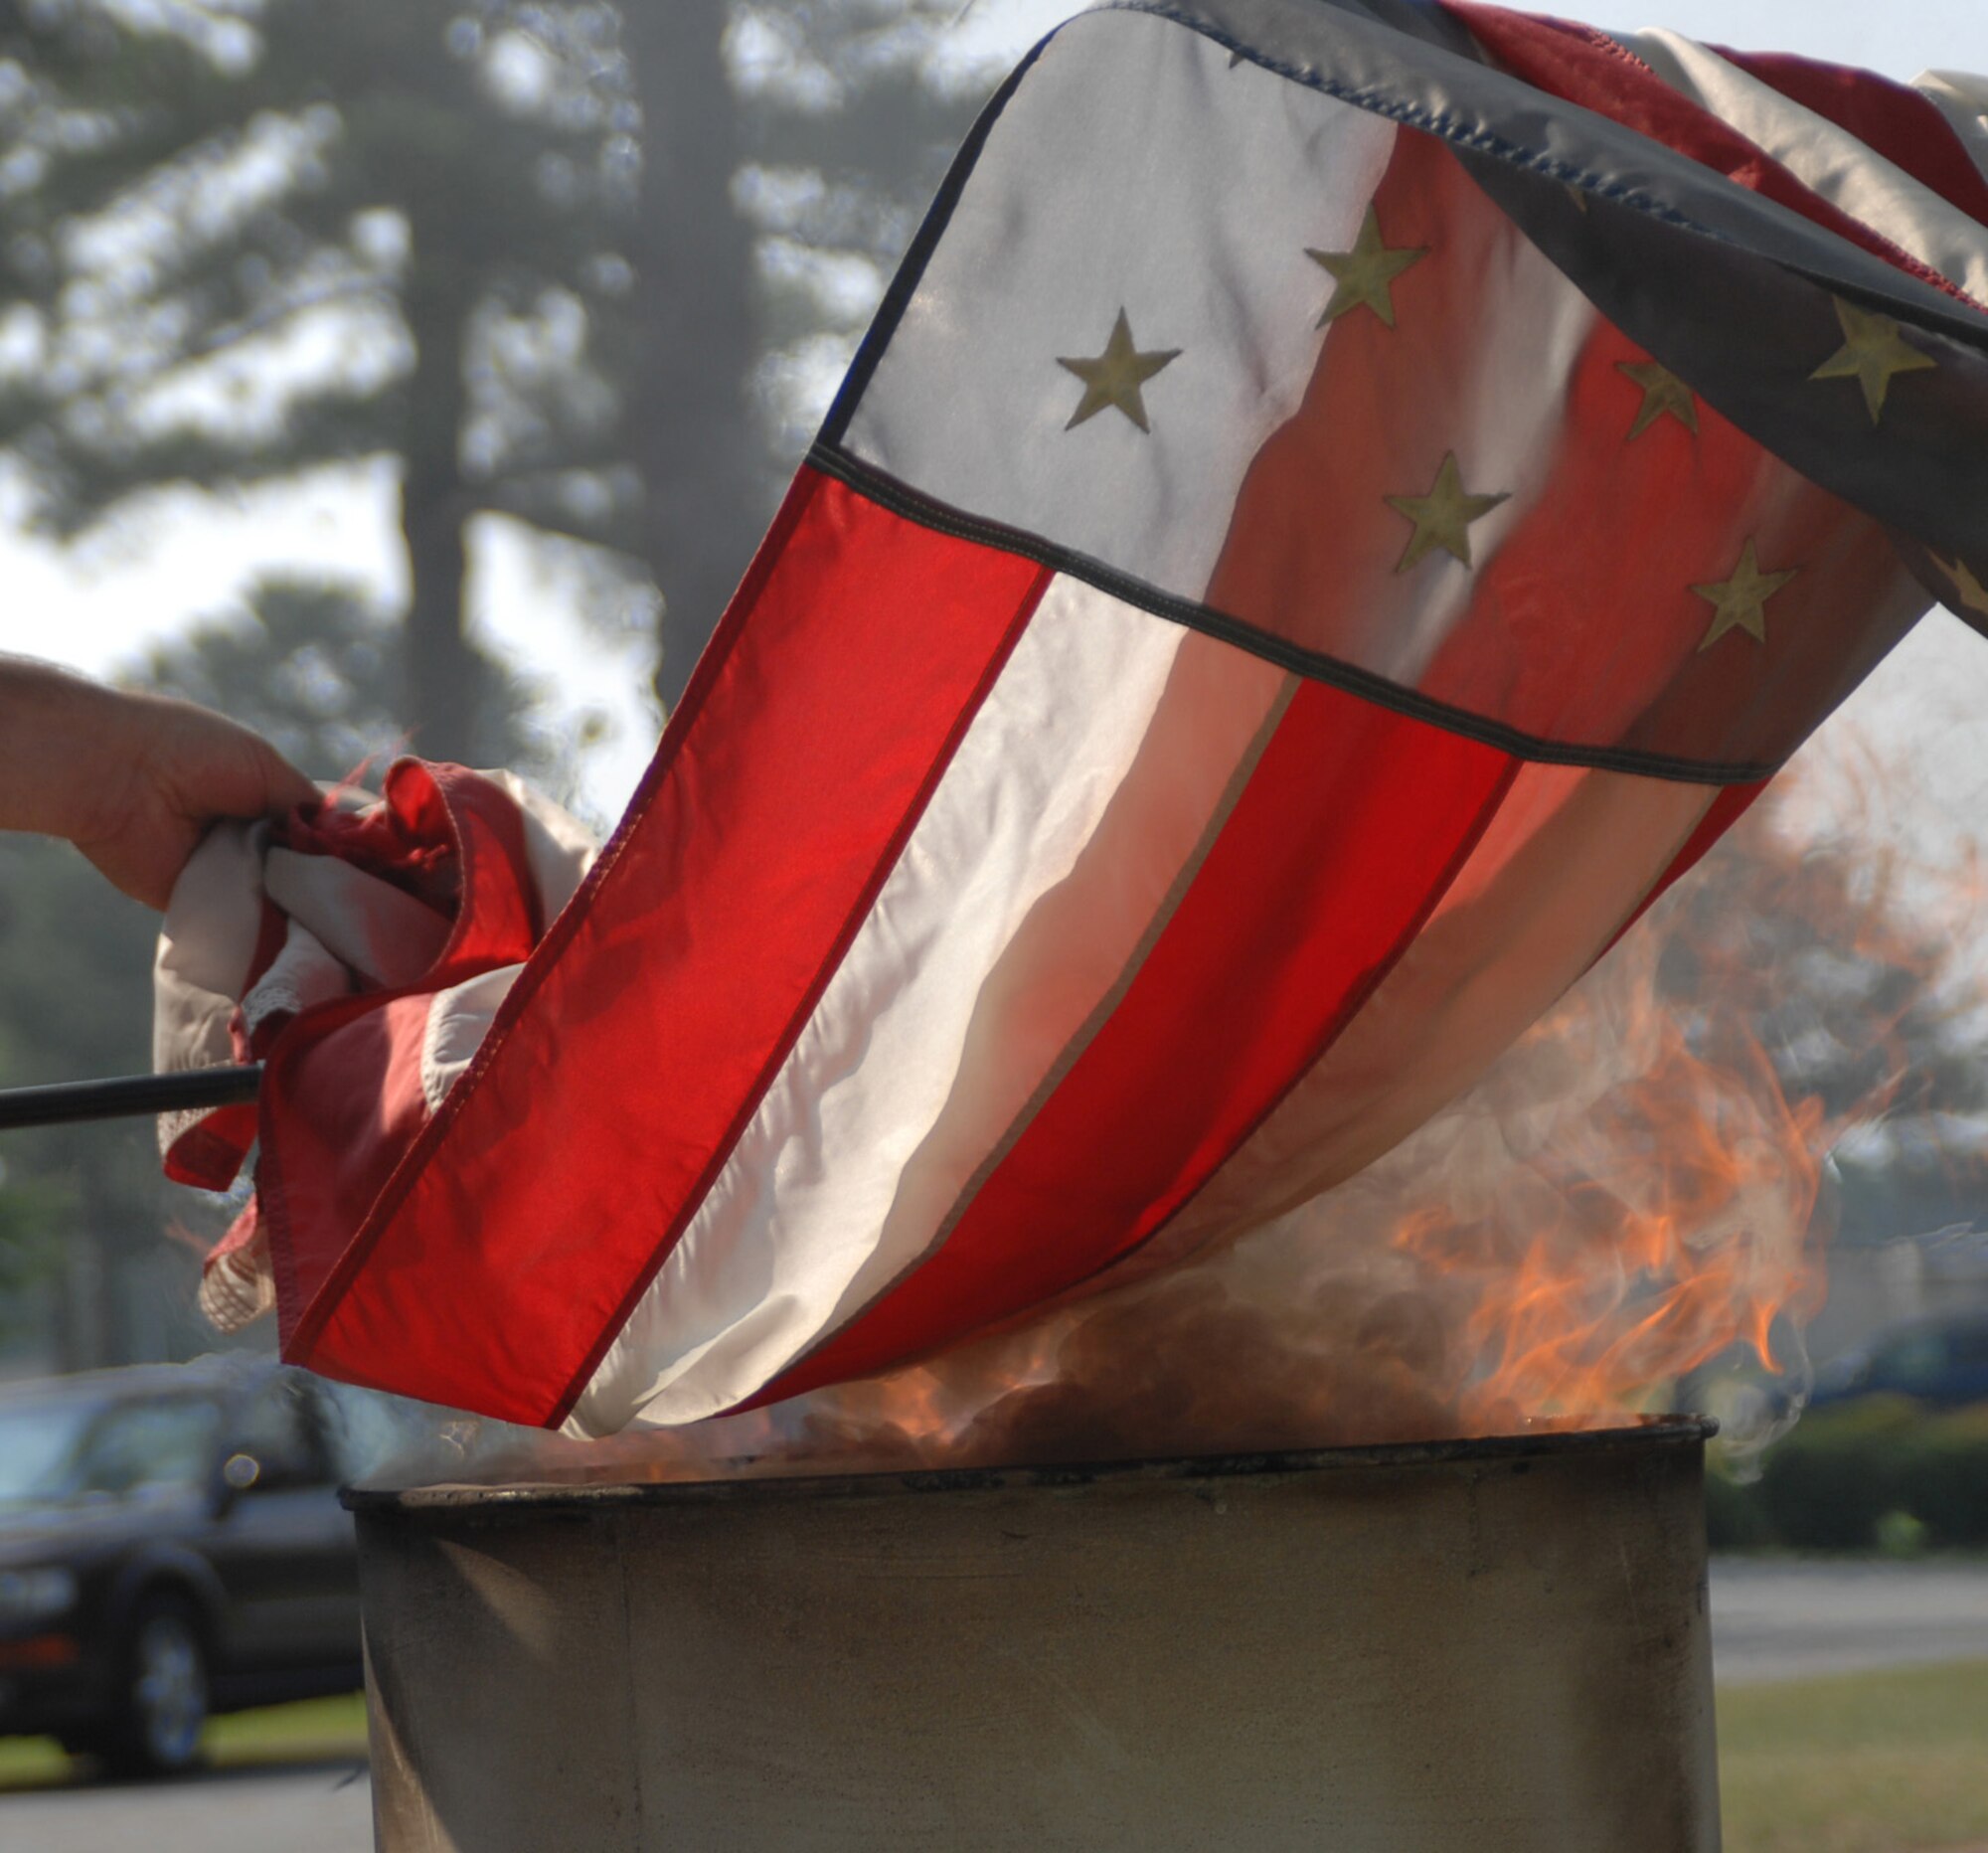 SEYMOUR JOHNSON AIR FORCE BASE, N.C. - Members from Boy Scout Troop 299 place an American flag in a barrel of flames, June 14, 2008. This was part of a flag retirement ceremony, which shows respect to worn, faded U.S. flags. (U.S. Air Force photo by Airman 1st Class Makenzie R. Lang)